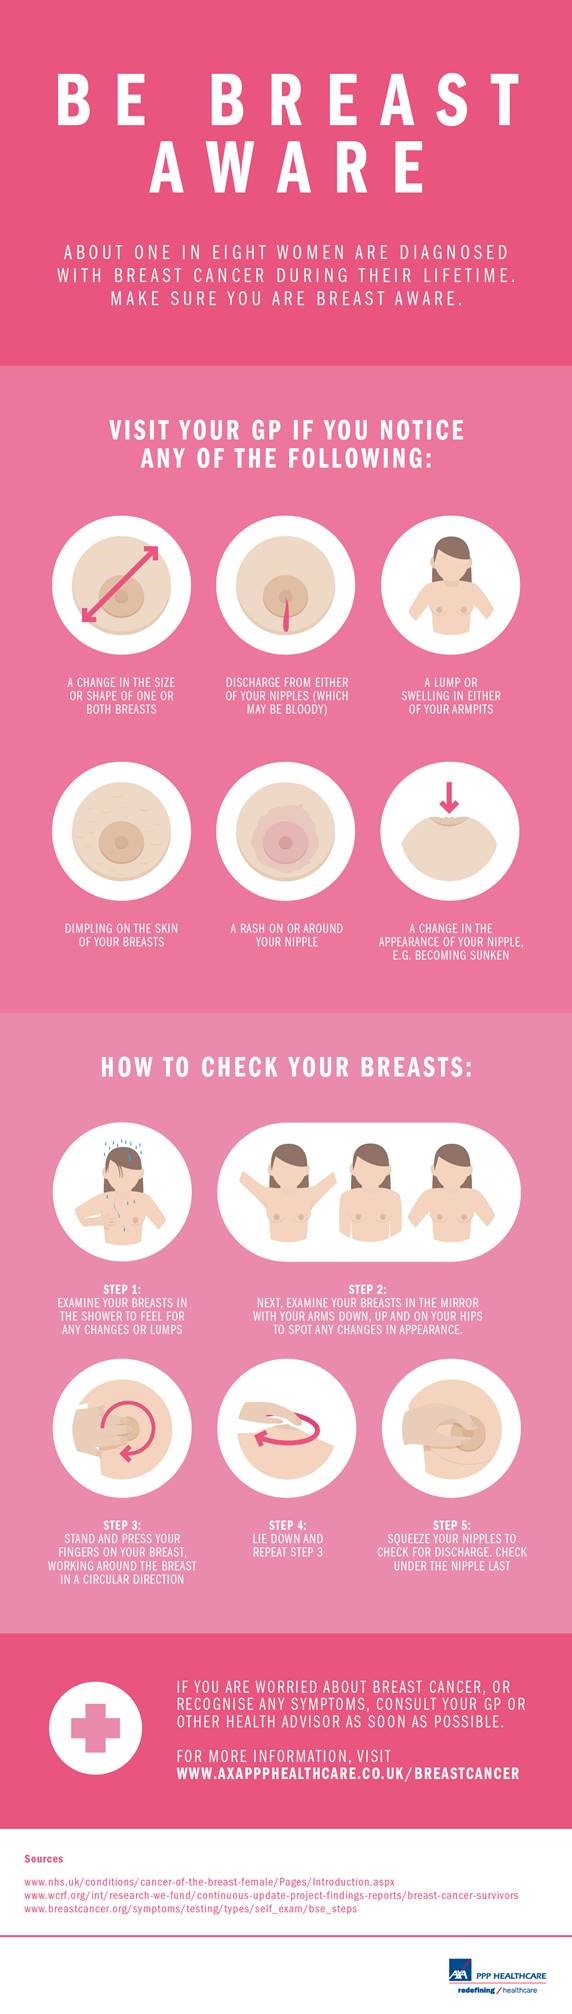 P-breast aware-infographic